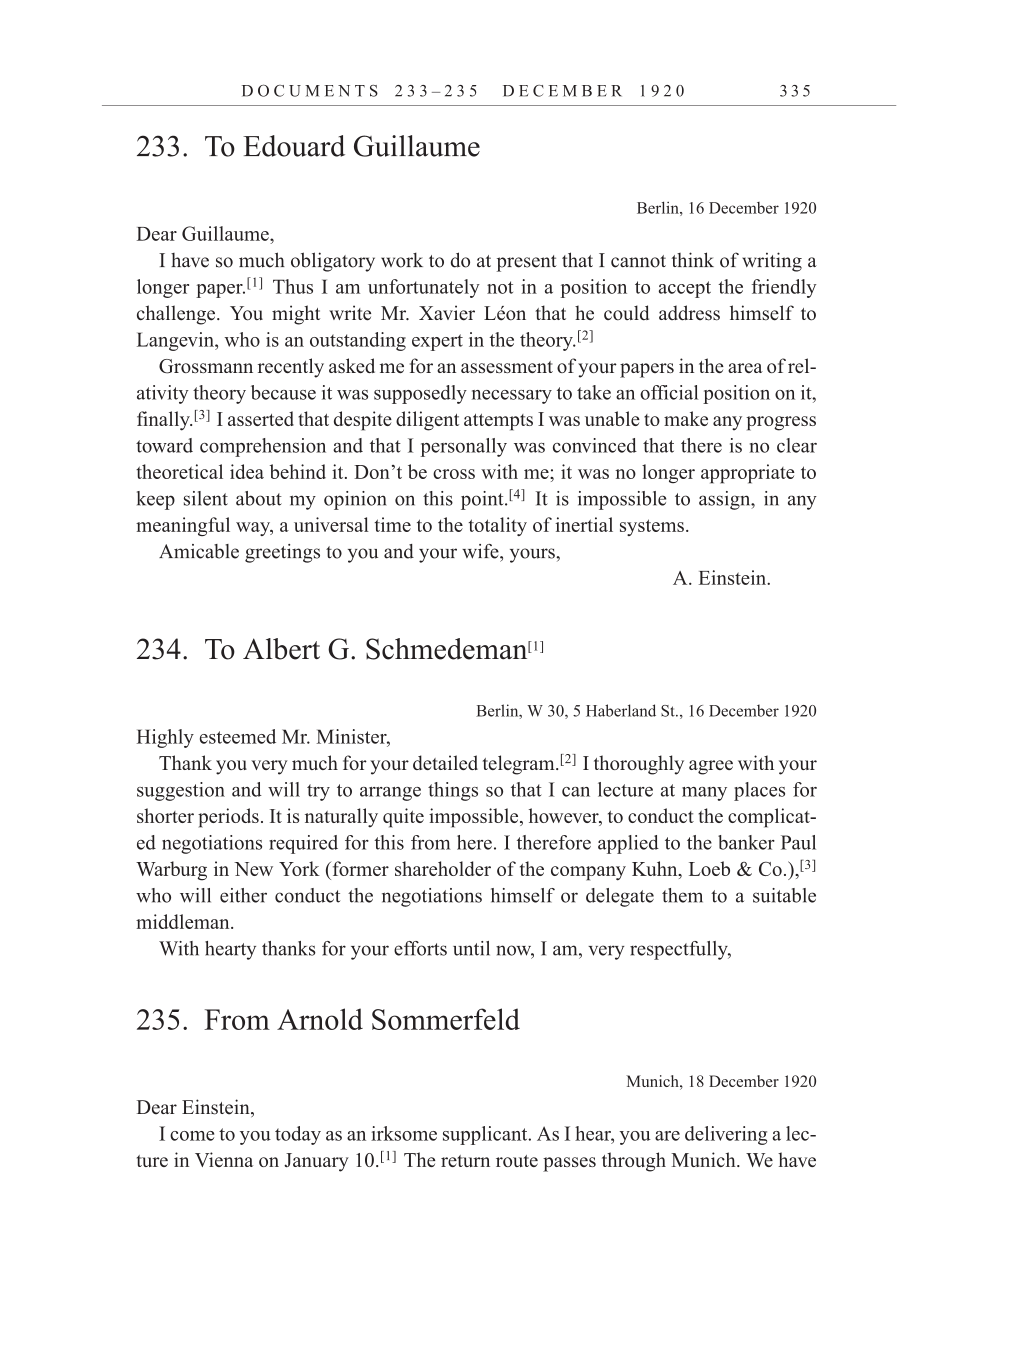 Volume 10: The Berlin Years: Correspondence, May-December 1920, and Supplementary Correspondence, 1909-1920 (English translation supplement) page 335